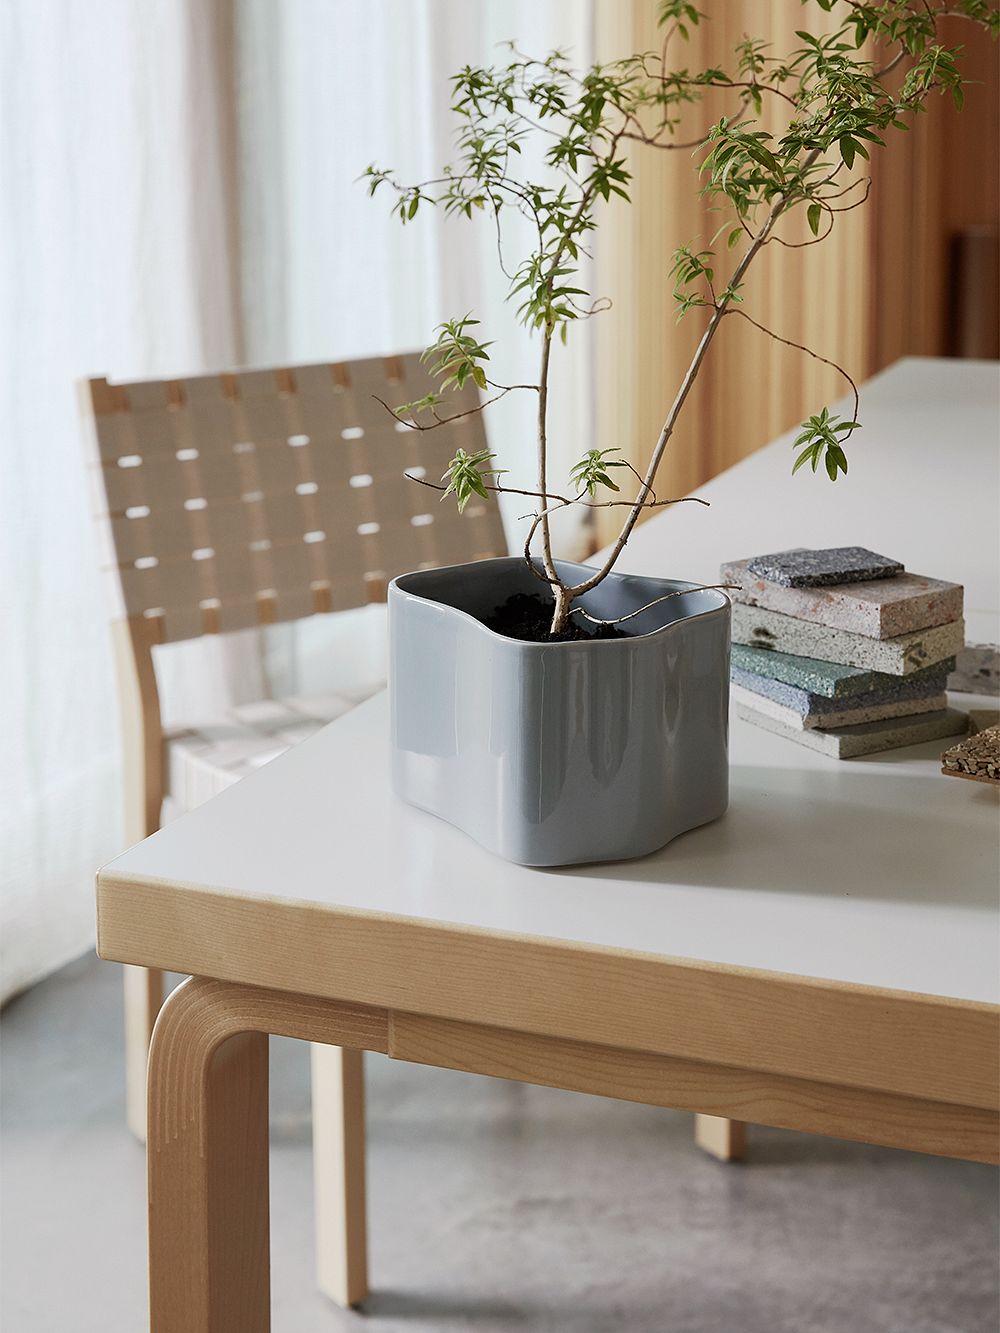 An image featuring Artek's grey Riihitie plant pot and Aalto chair 611 as part of the decor.